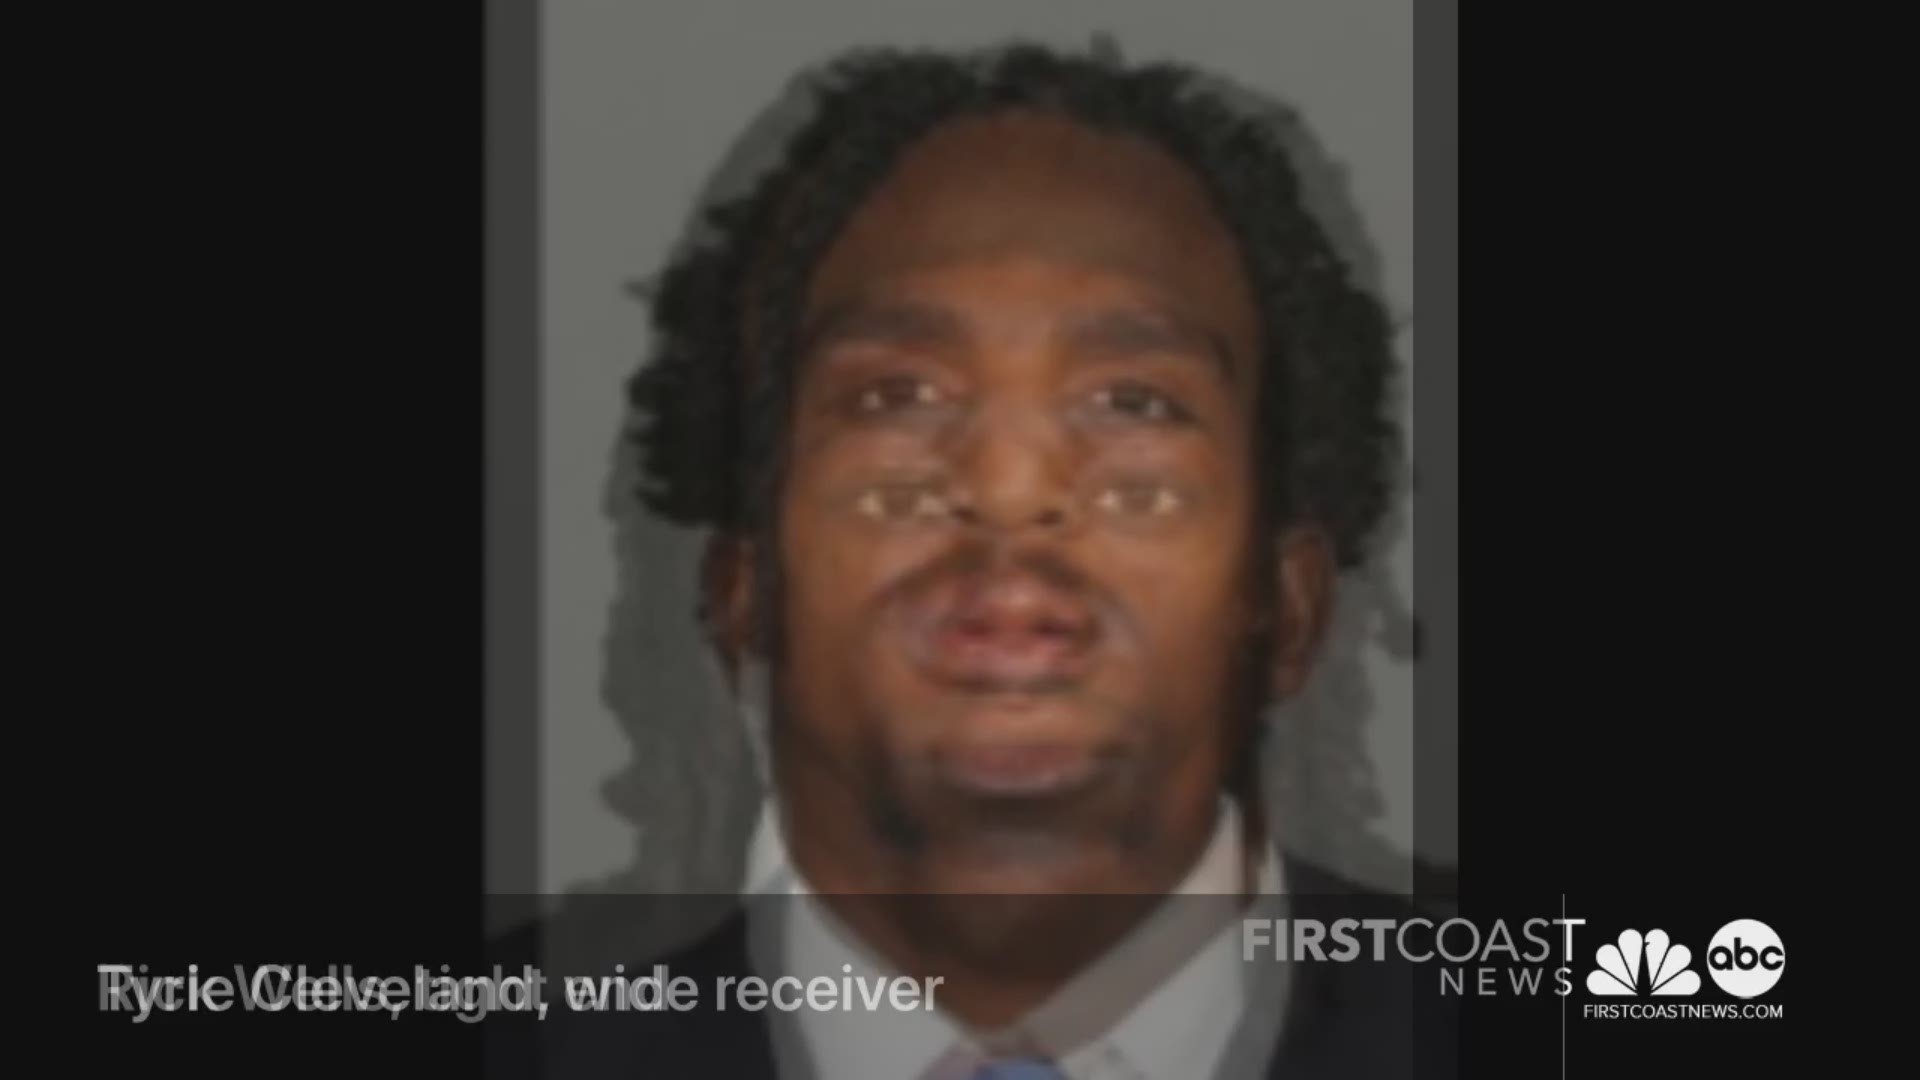 The incident involved several UF football players and a Gainesville-area gambler named Devante' Zachery - aka "Tay Bang" - and his friends, according to a UF police report obtained by First Coast News.